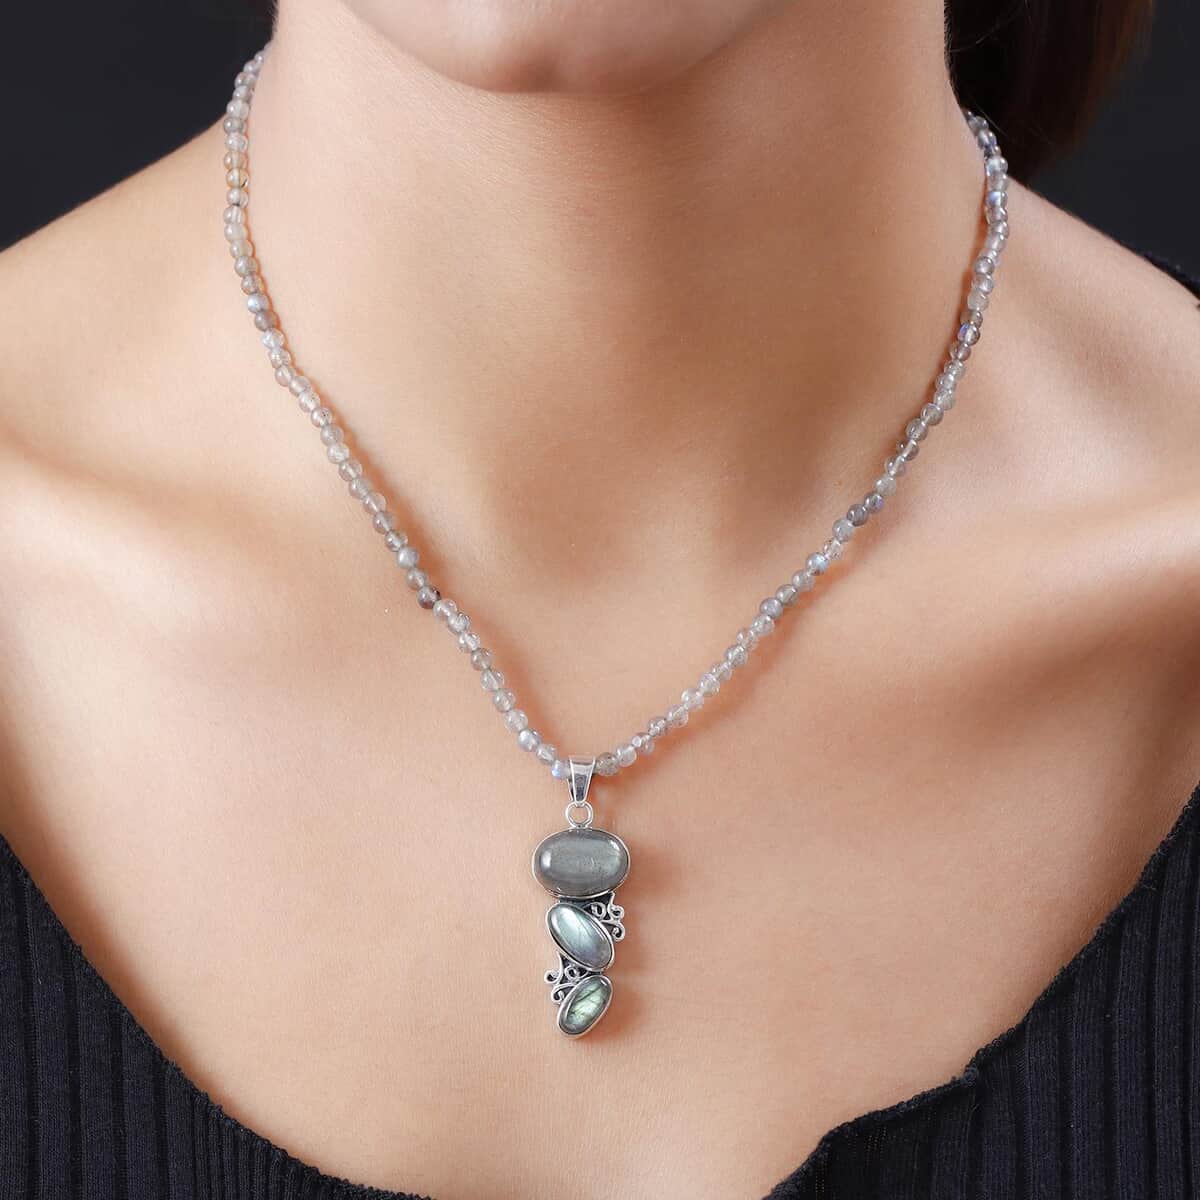 Malagasy Labradorite Bead Necklace in Sterling Silver, Labradorite Pendant, Silver Jewelry Gifts 53.85 ctw (20 Inches) image number 2